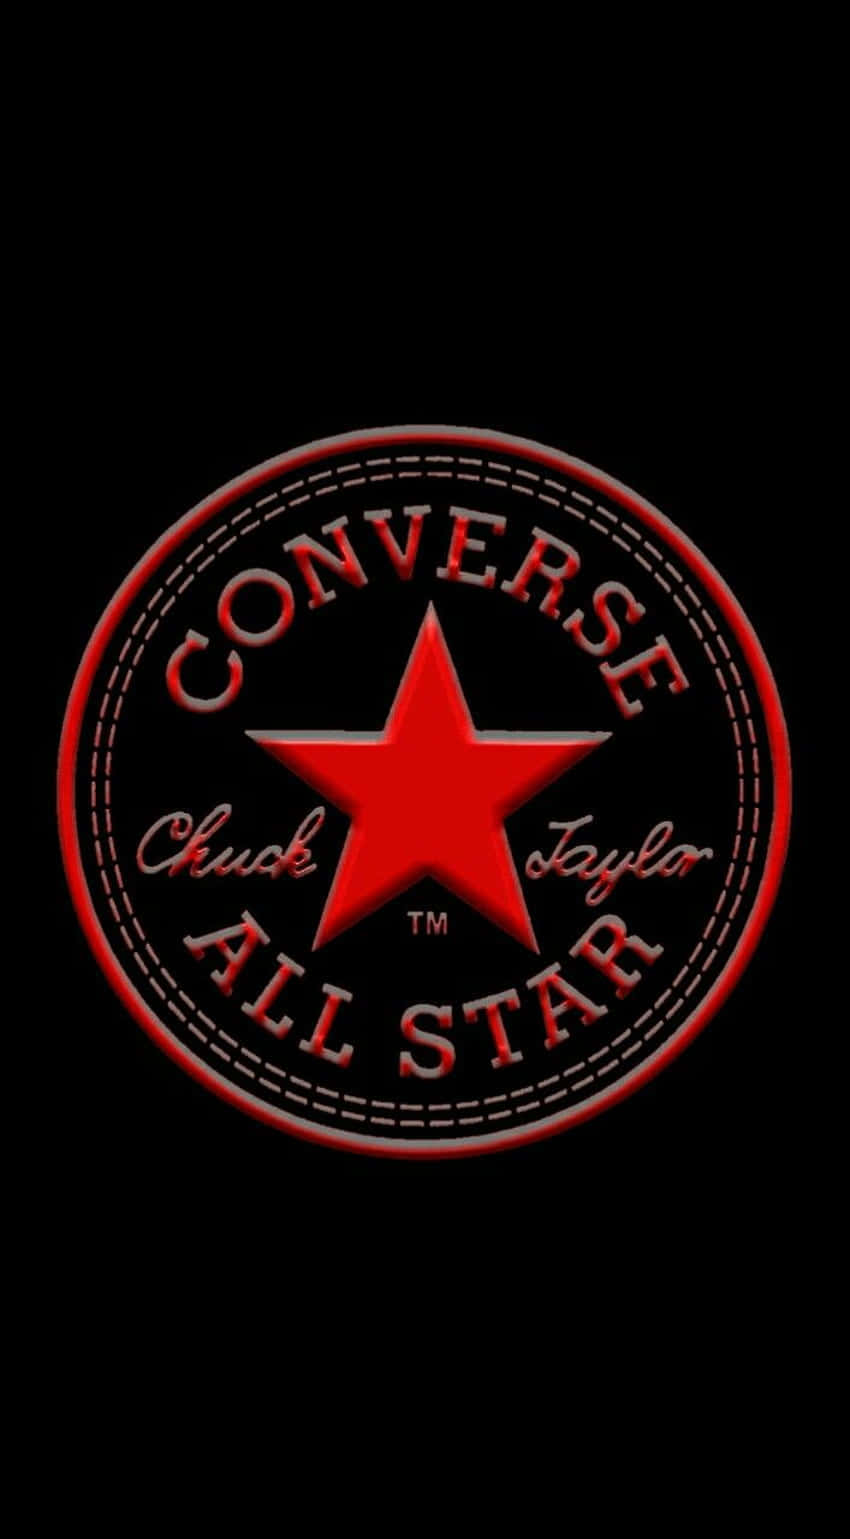 Download Converse Background | Wallpapers.com